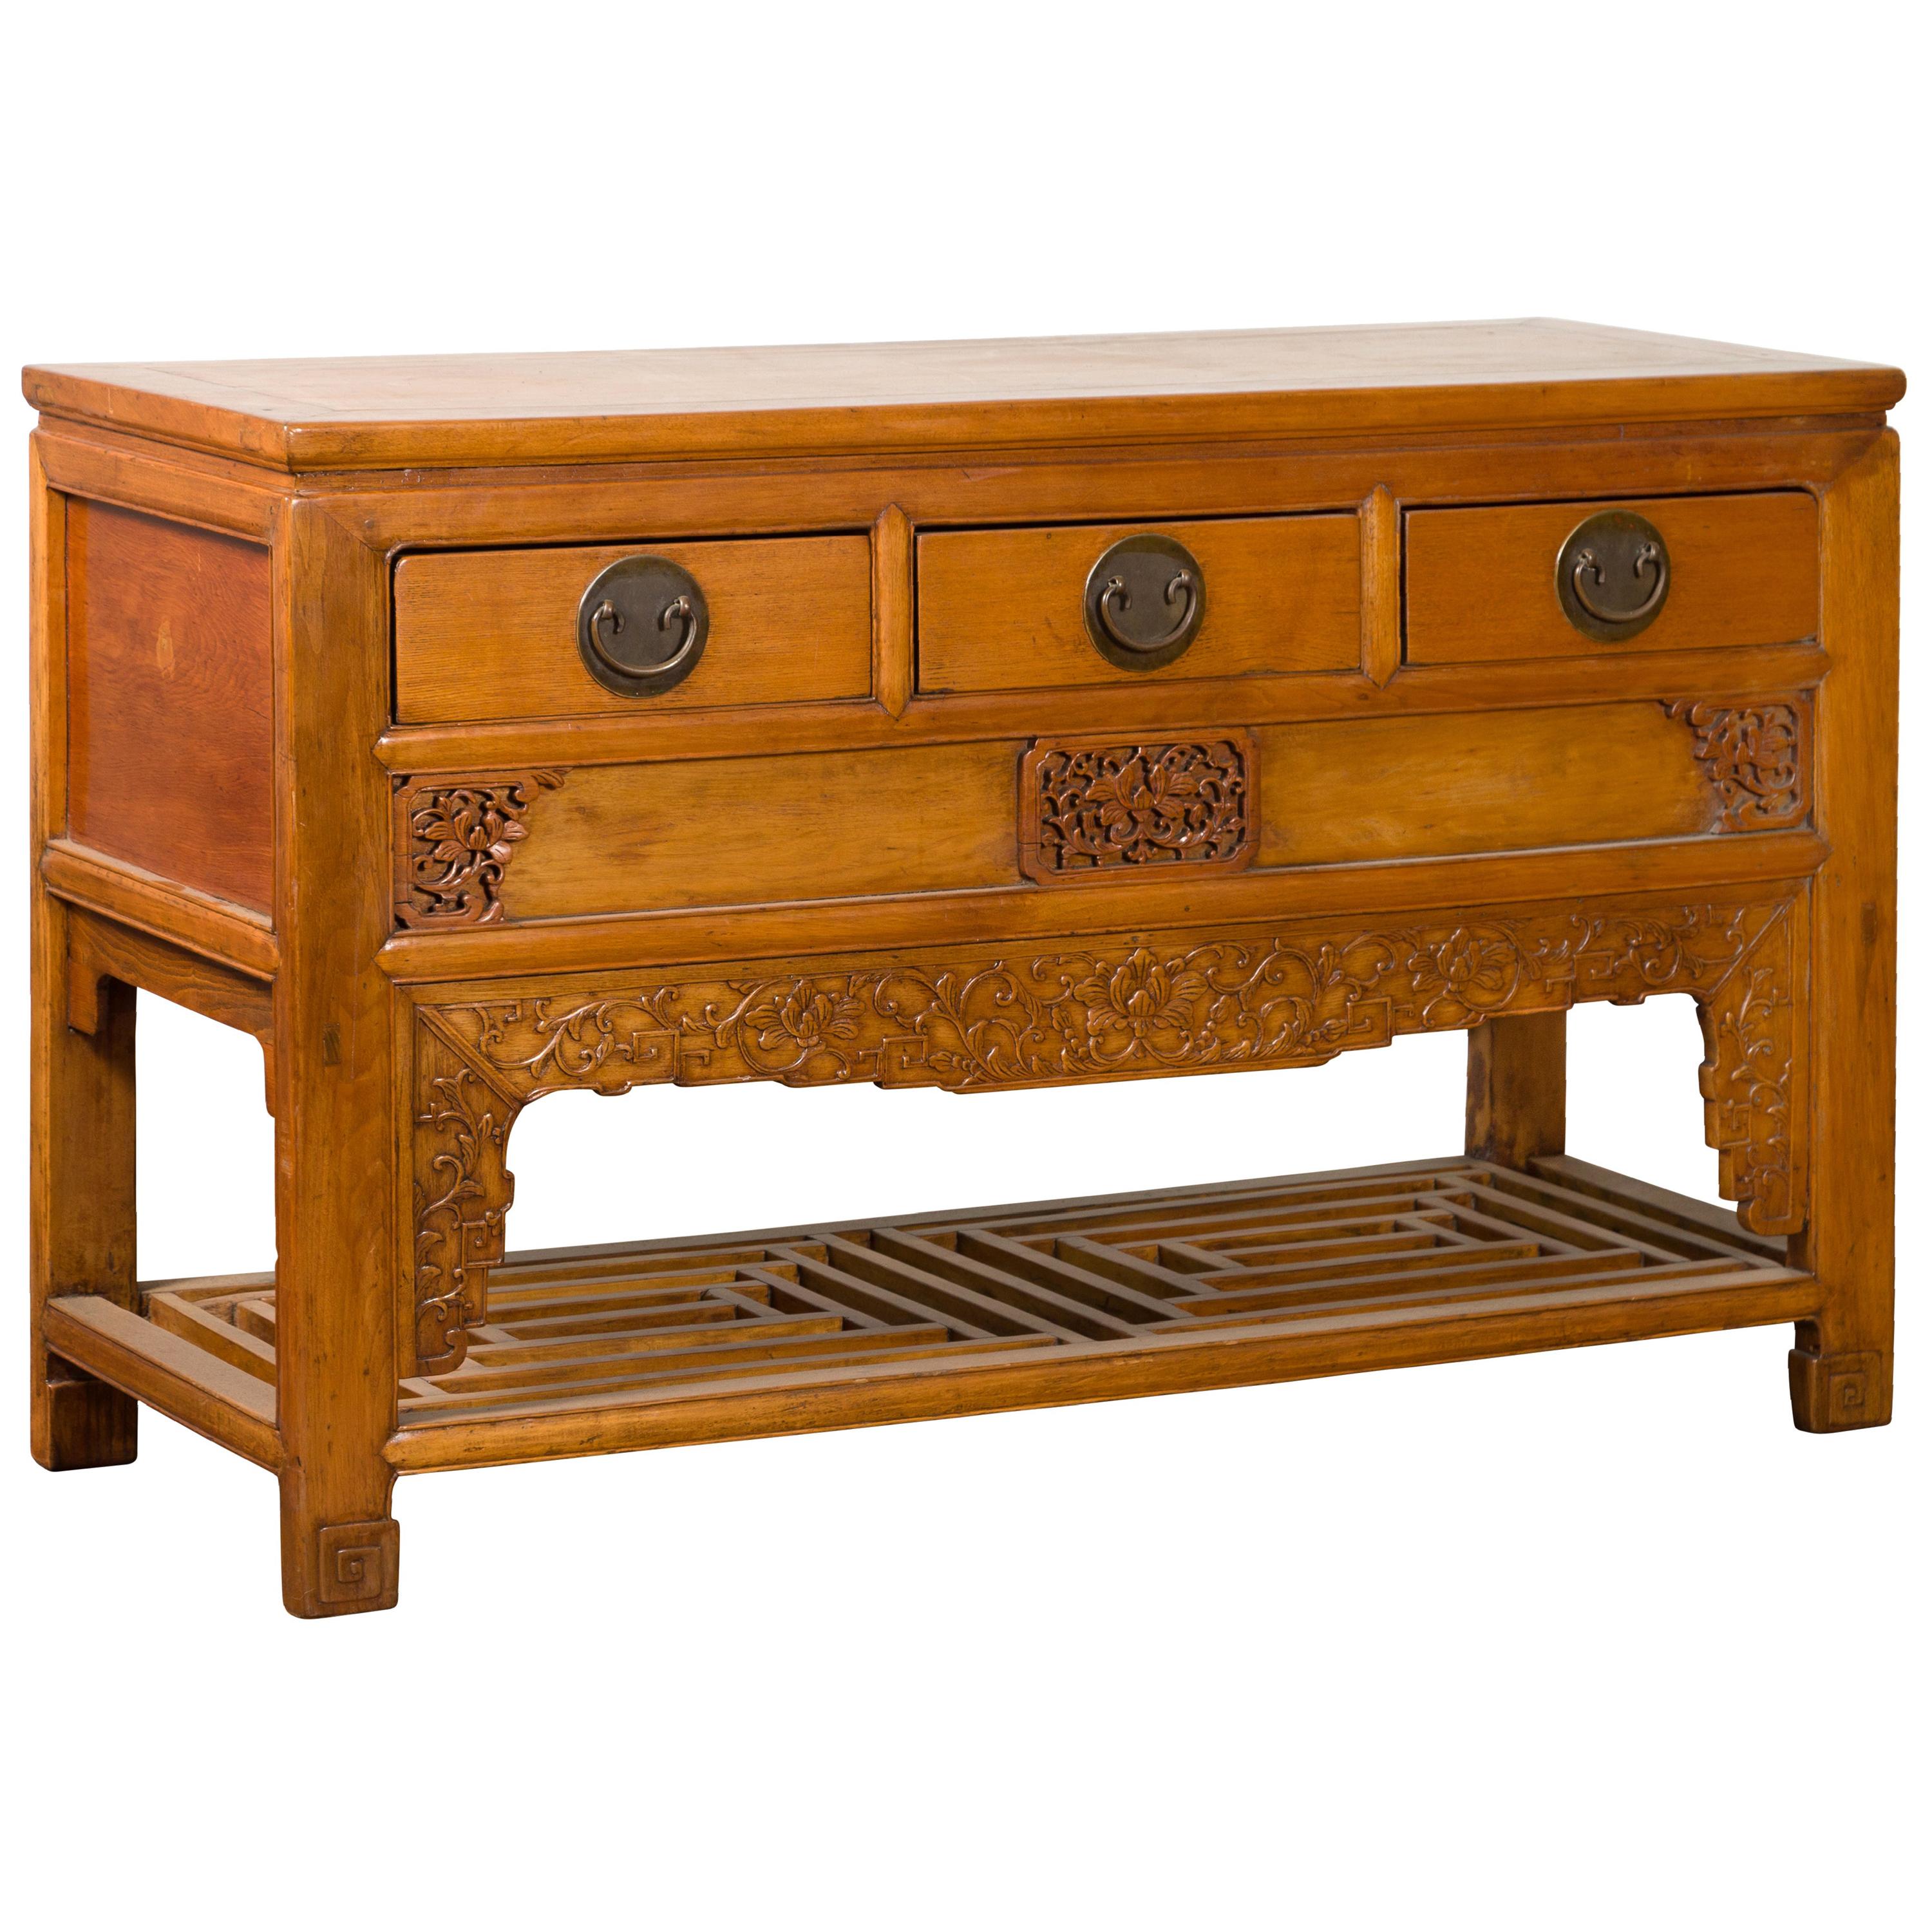 Chinese Qing Dynasty 19th Century Waisted Sideboard with Carved Floral Motifs